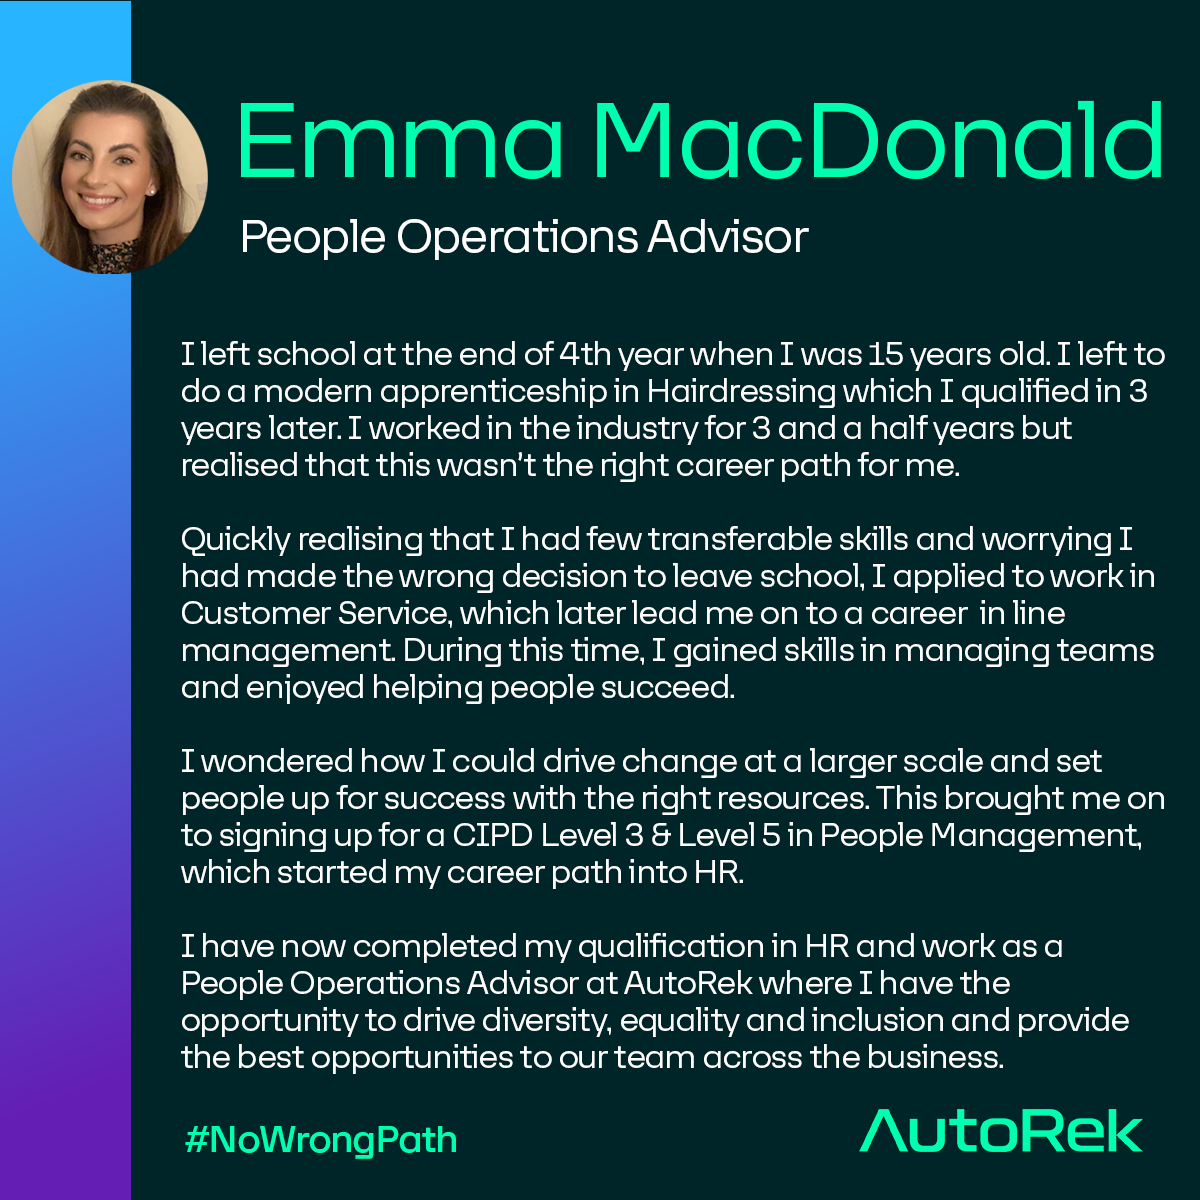 It’s exam results week in Scotland 📚 and AutoRek is proud to support #NoWrongPath. If things didn’t go as planned, know the results you got this week don’t have to determine your future. See how members of the AutoRek team got to where they are today 👇